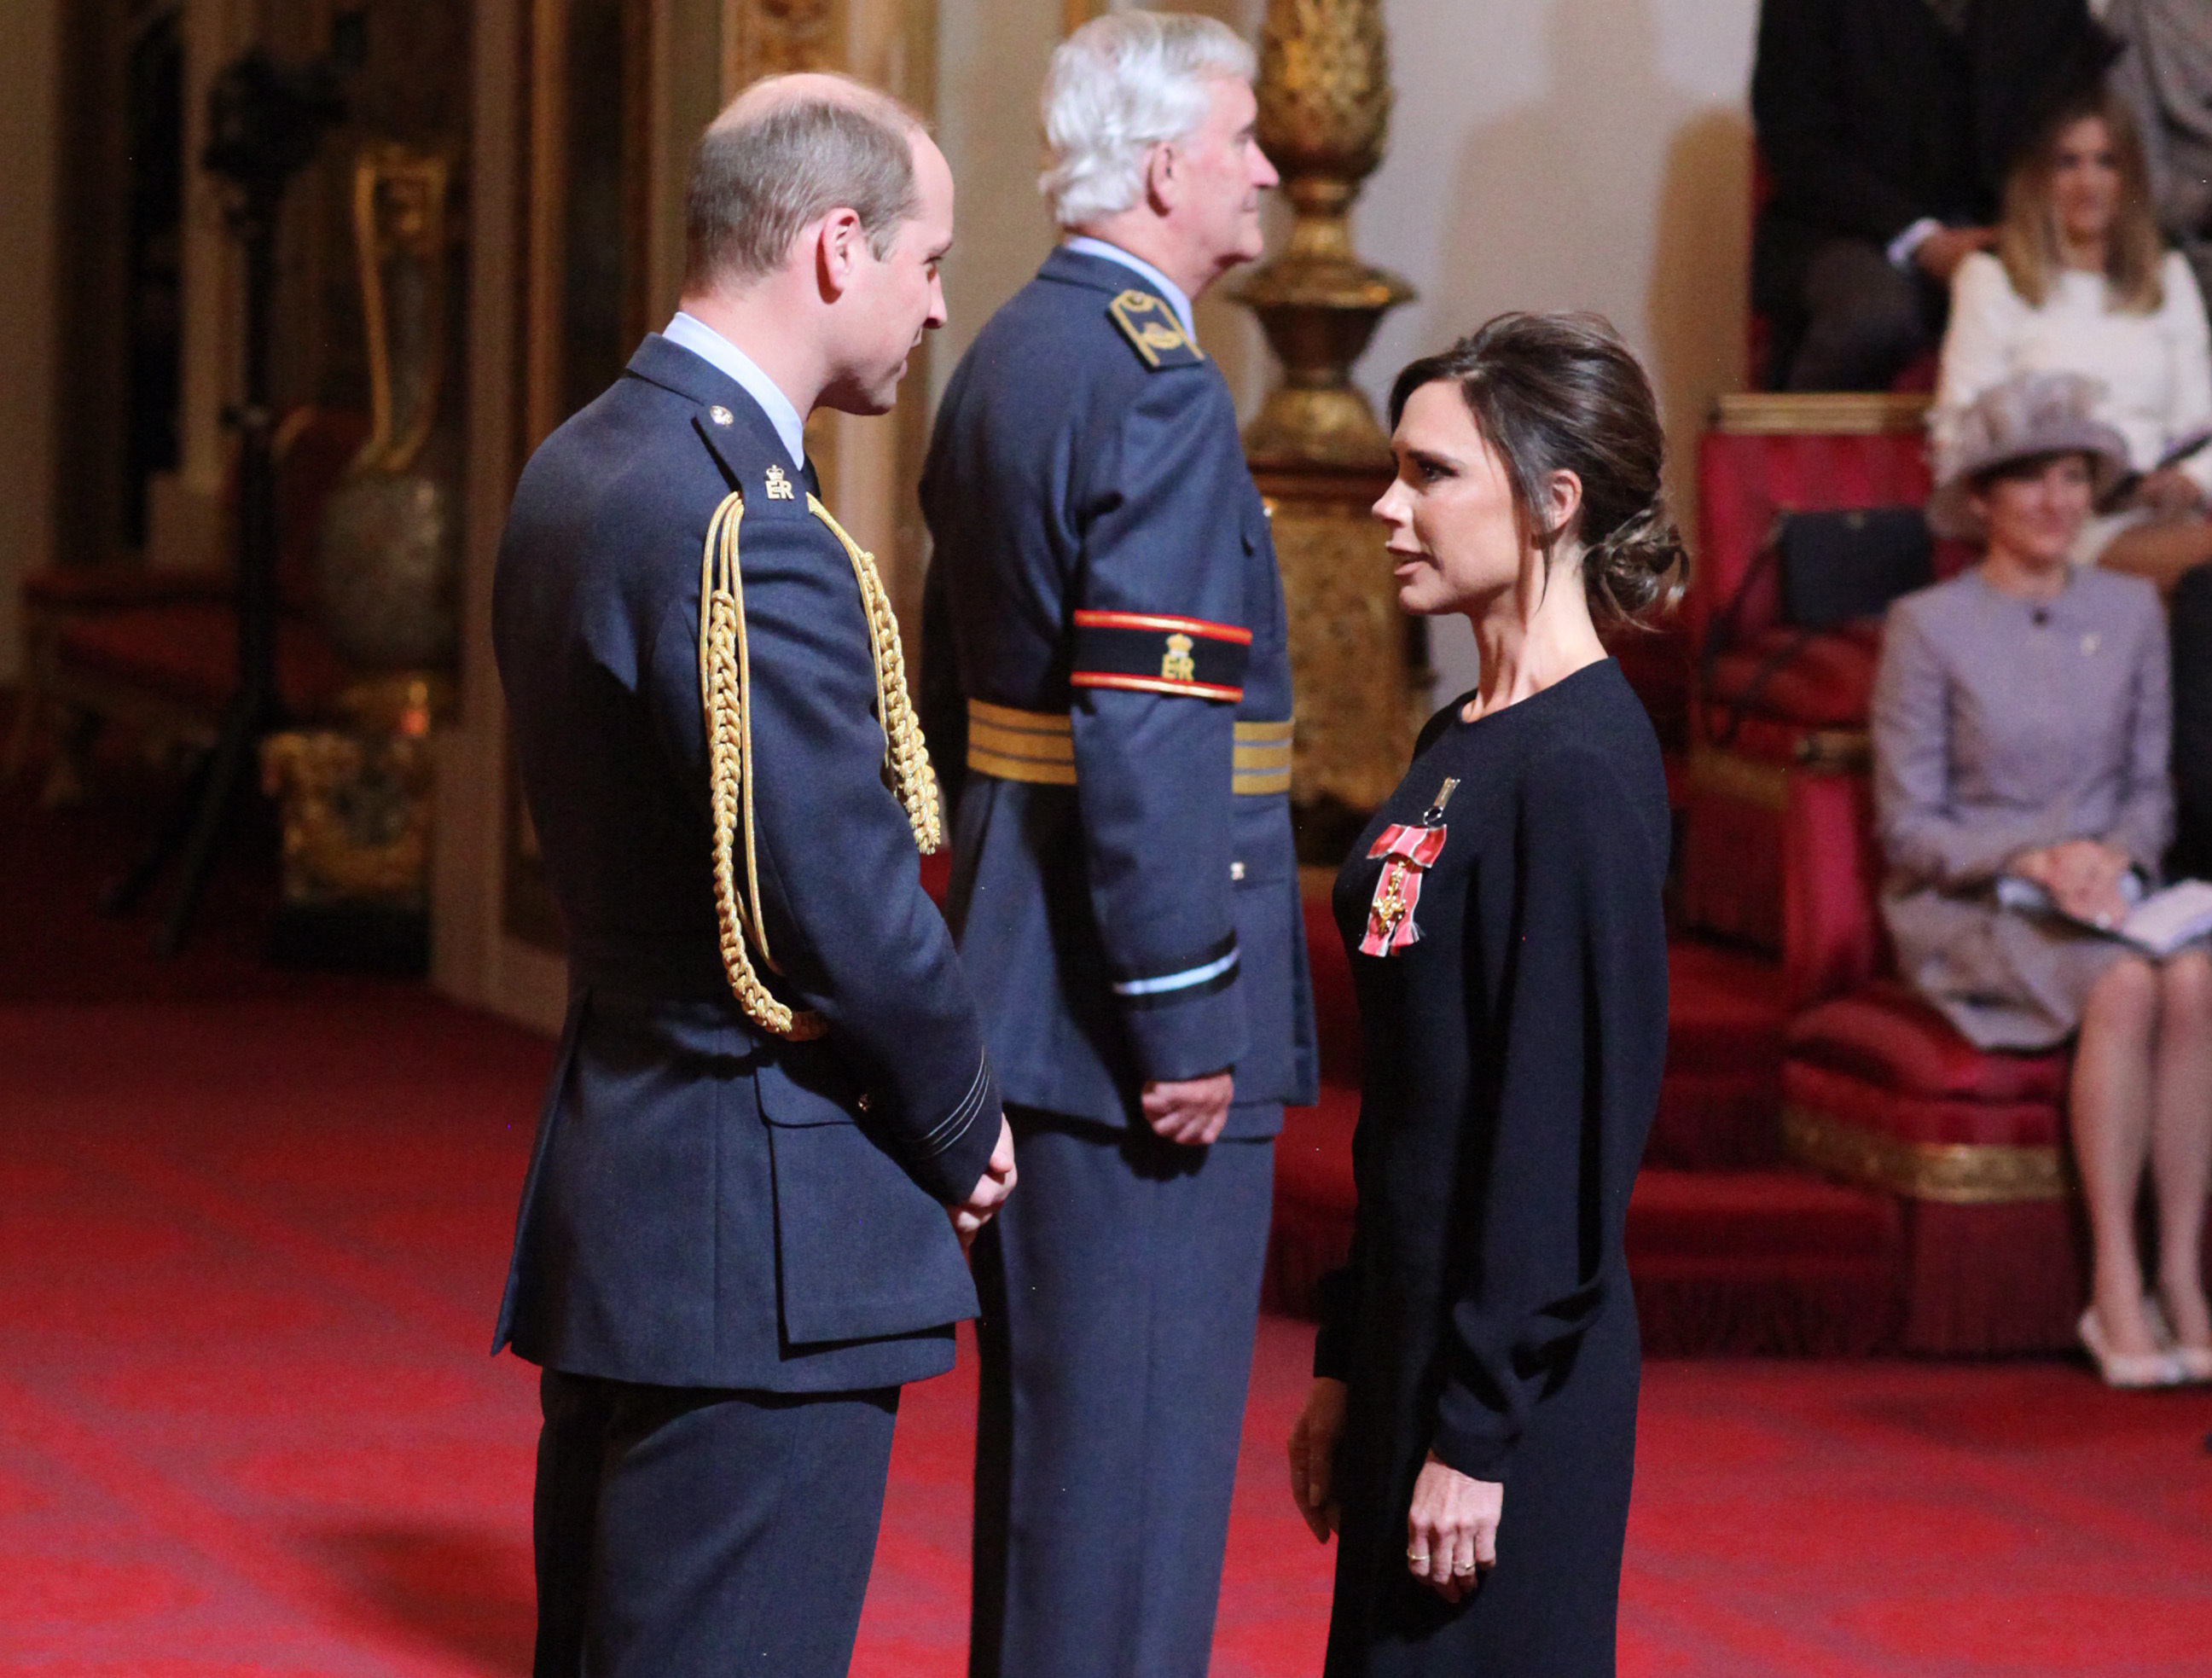 Victoria Beckham receives her OBE from the Duke of Cambridge during an investiture ceremony at Buckingham Palace in London. (Yui Mok - PA Images—PA Images via Getty Images)